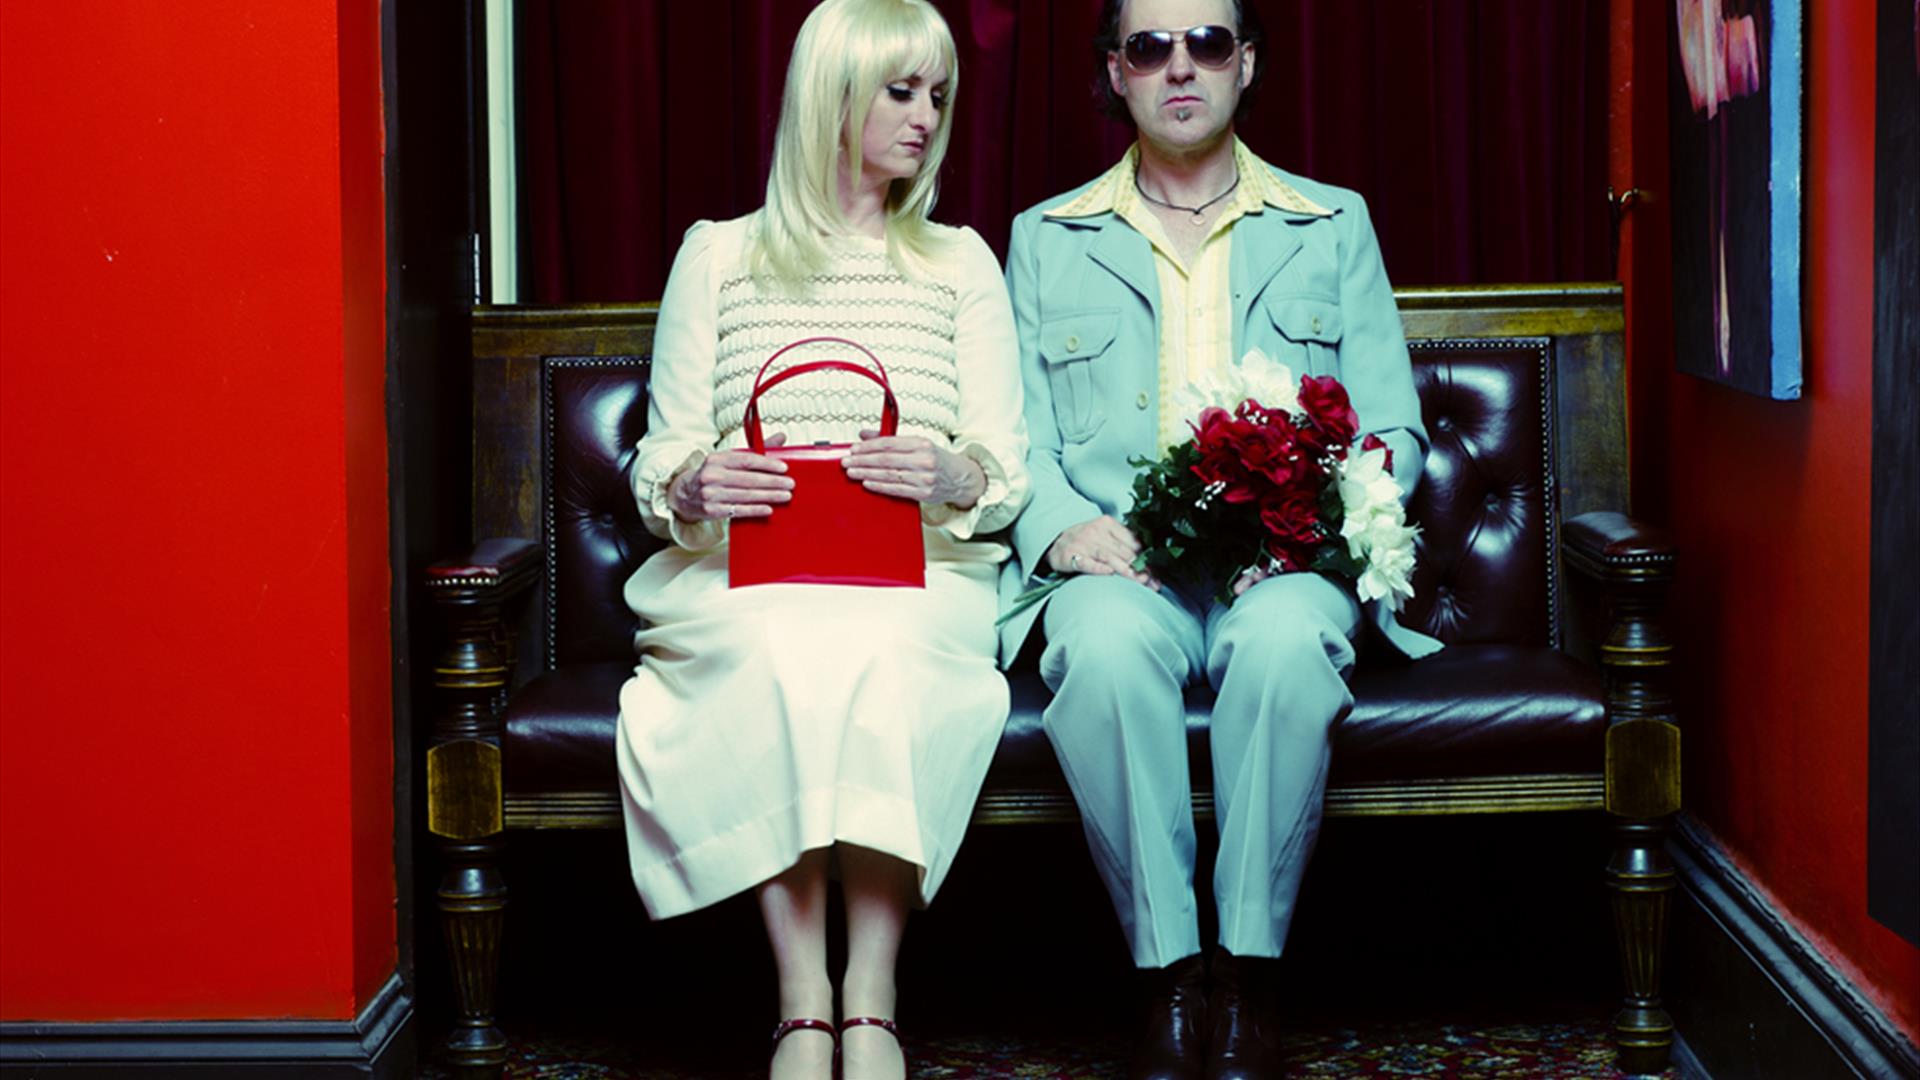 a man and woman in vintage clothing sitting on a bench. The woman is holding a red handbag, the man is holding a bouquet of red and white flowers.